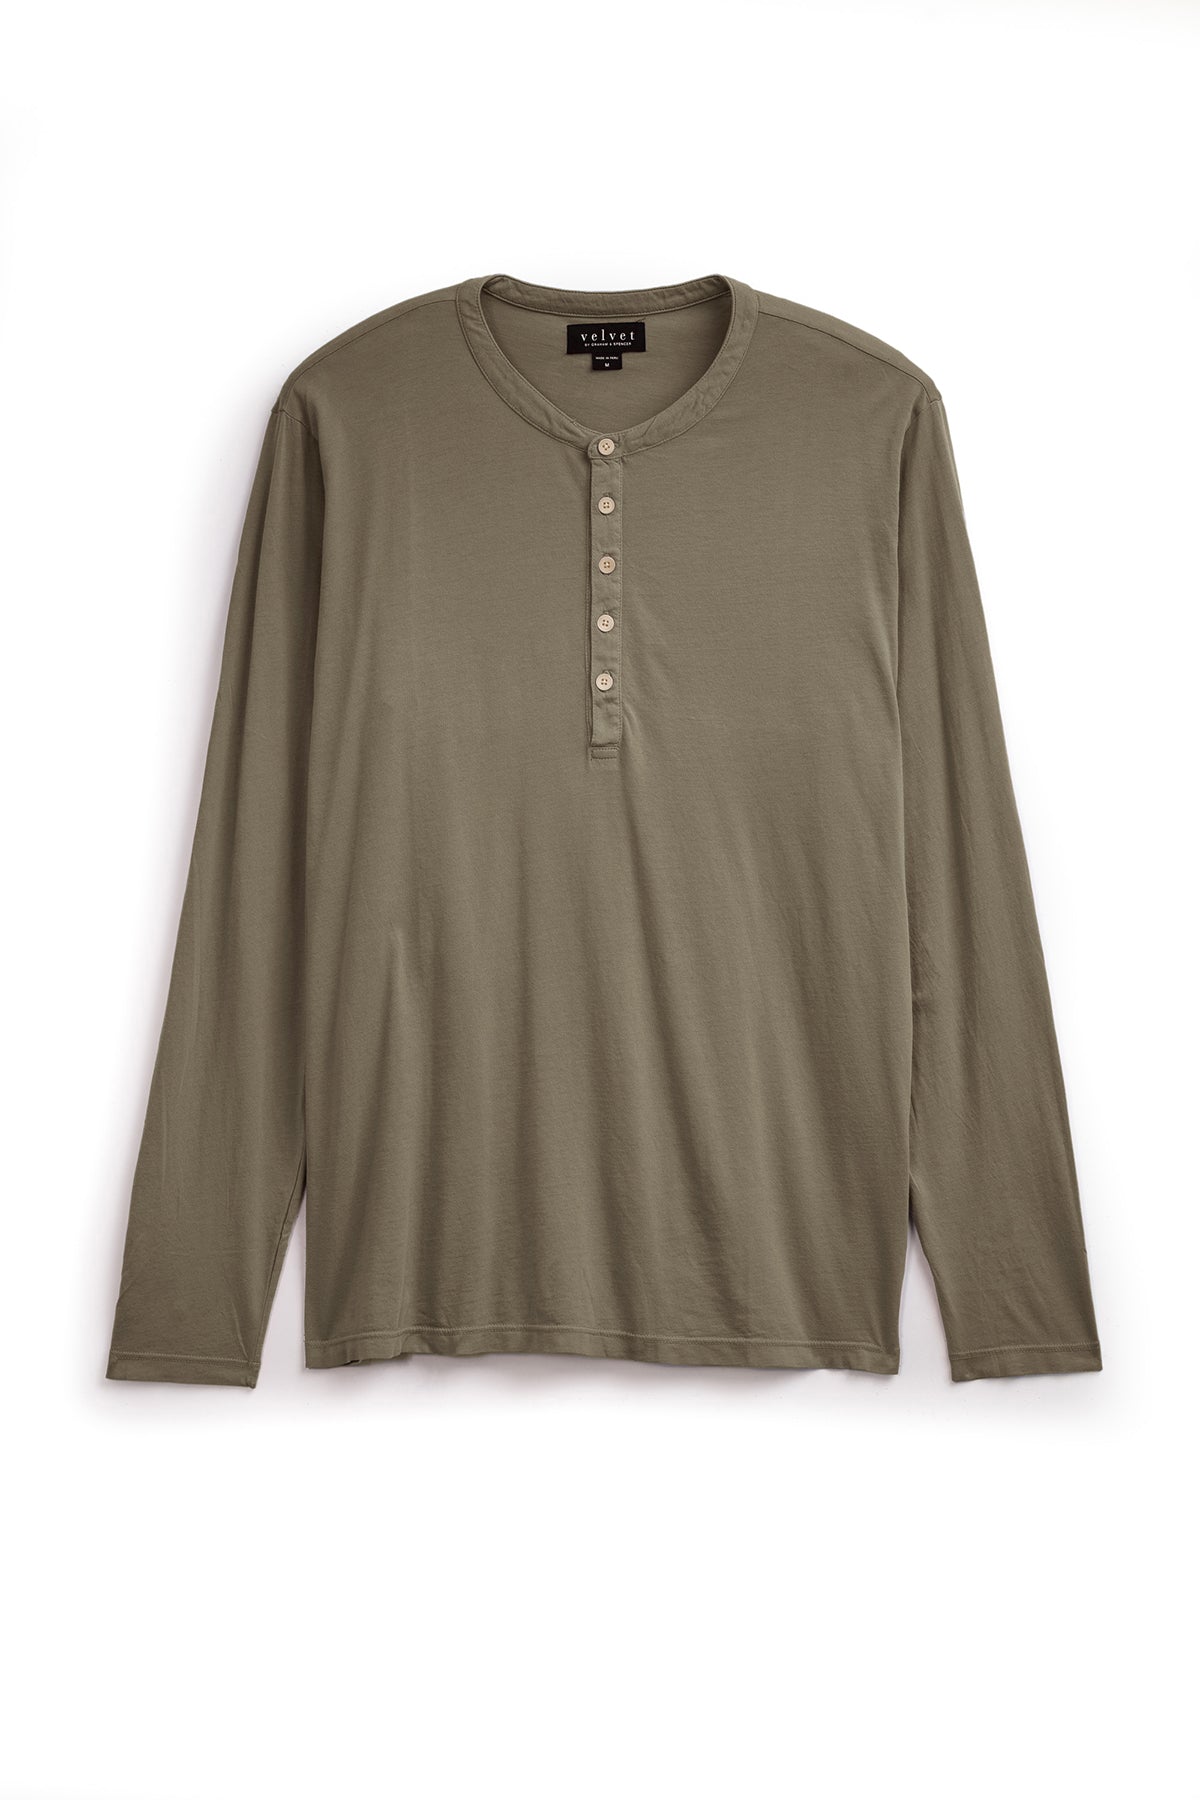 Olive green ALVARO COTTON JERSEY HENLEY shirt by Velvet by Graham & Spencer with a vintage-look displayed flat against a white background.-36009207824577